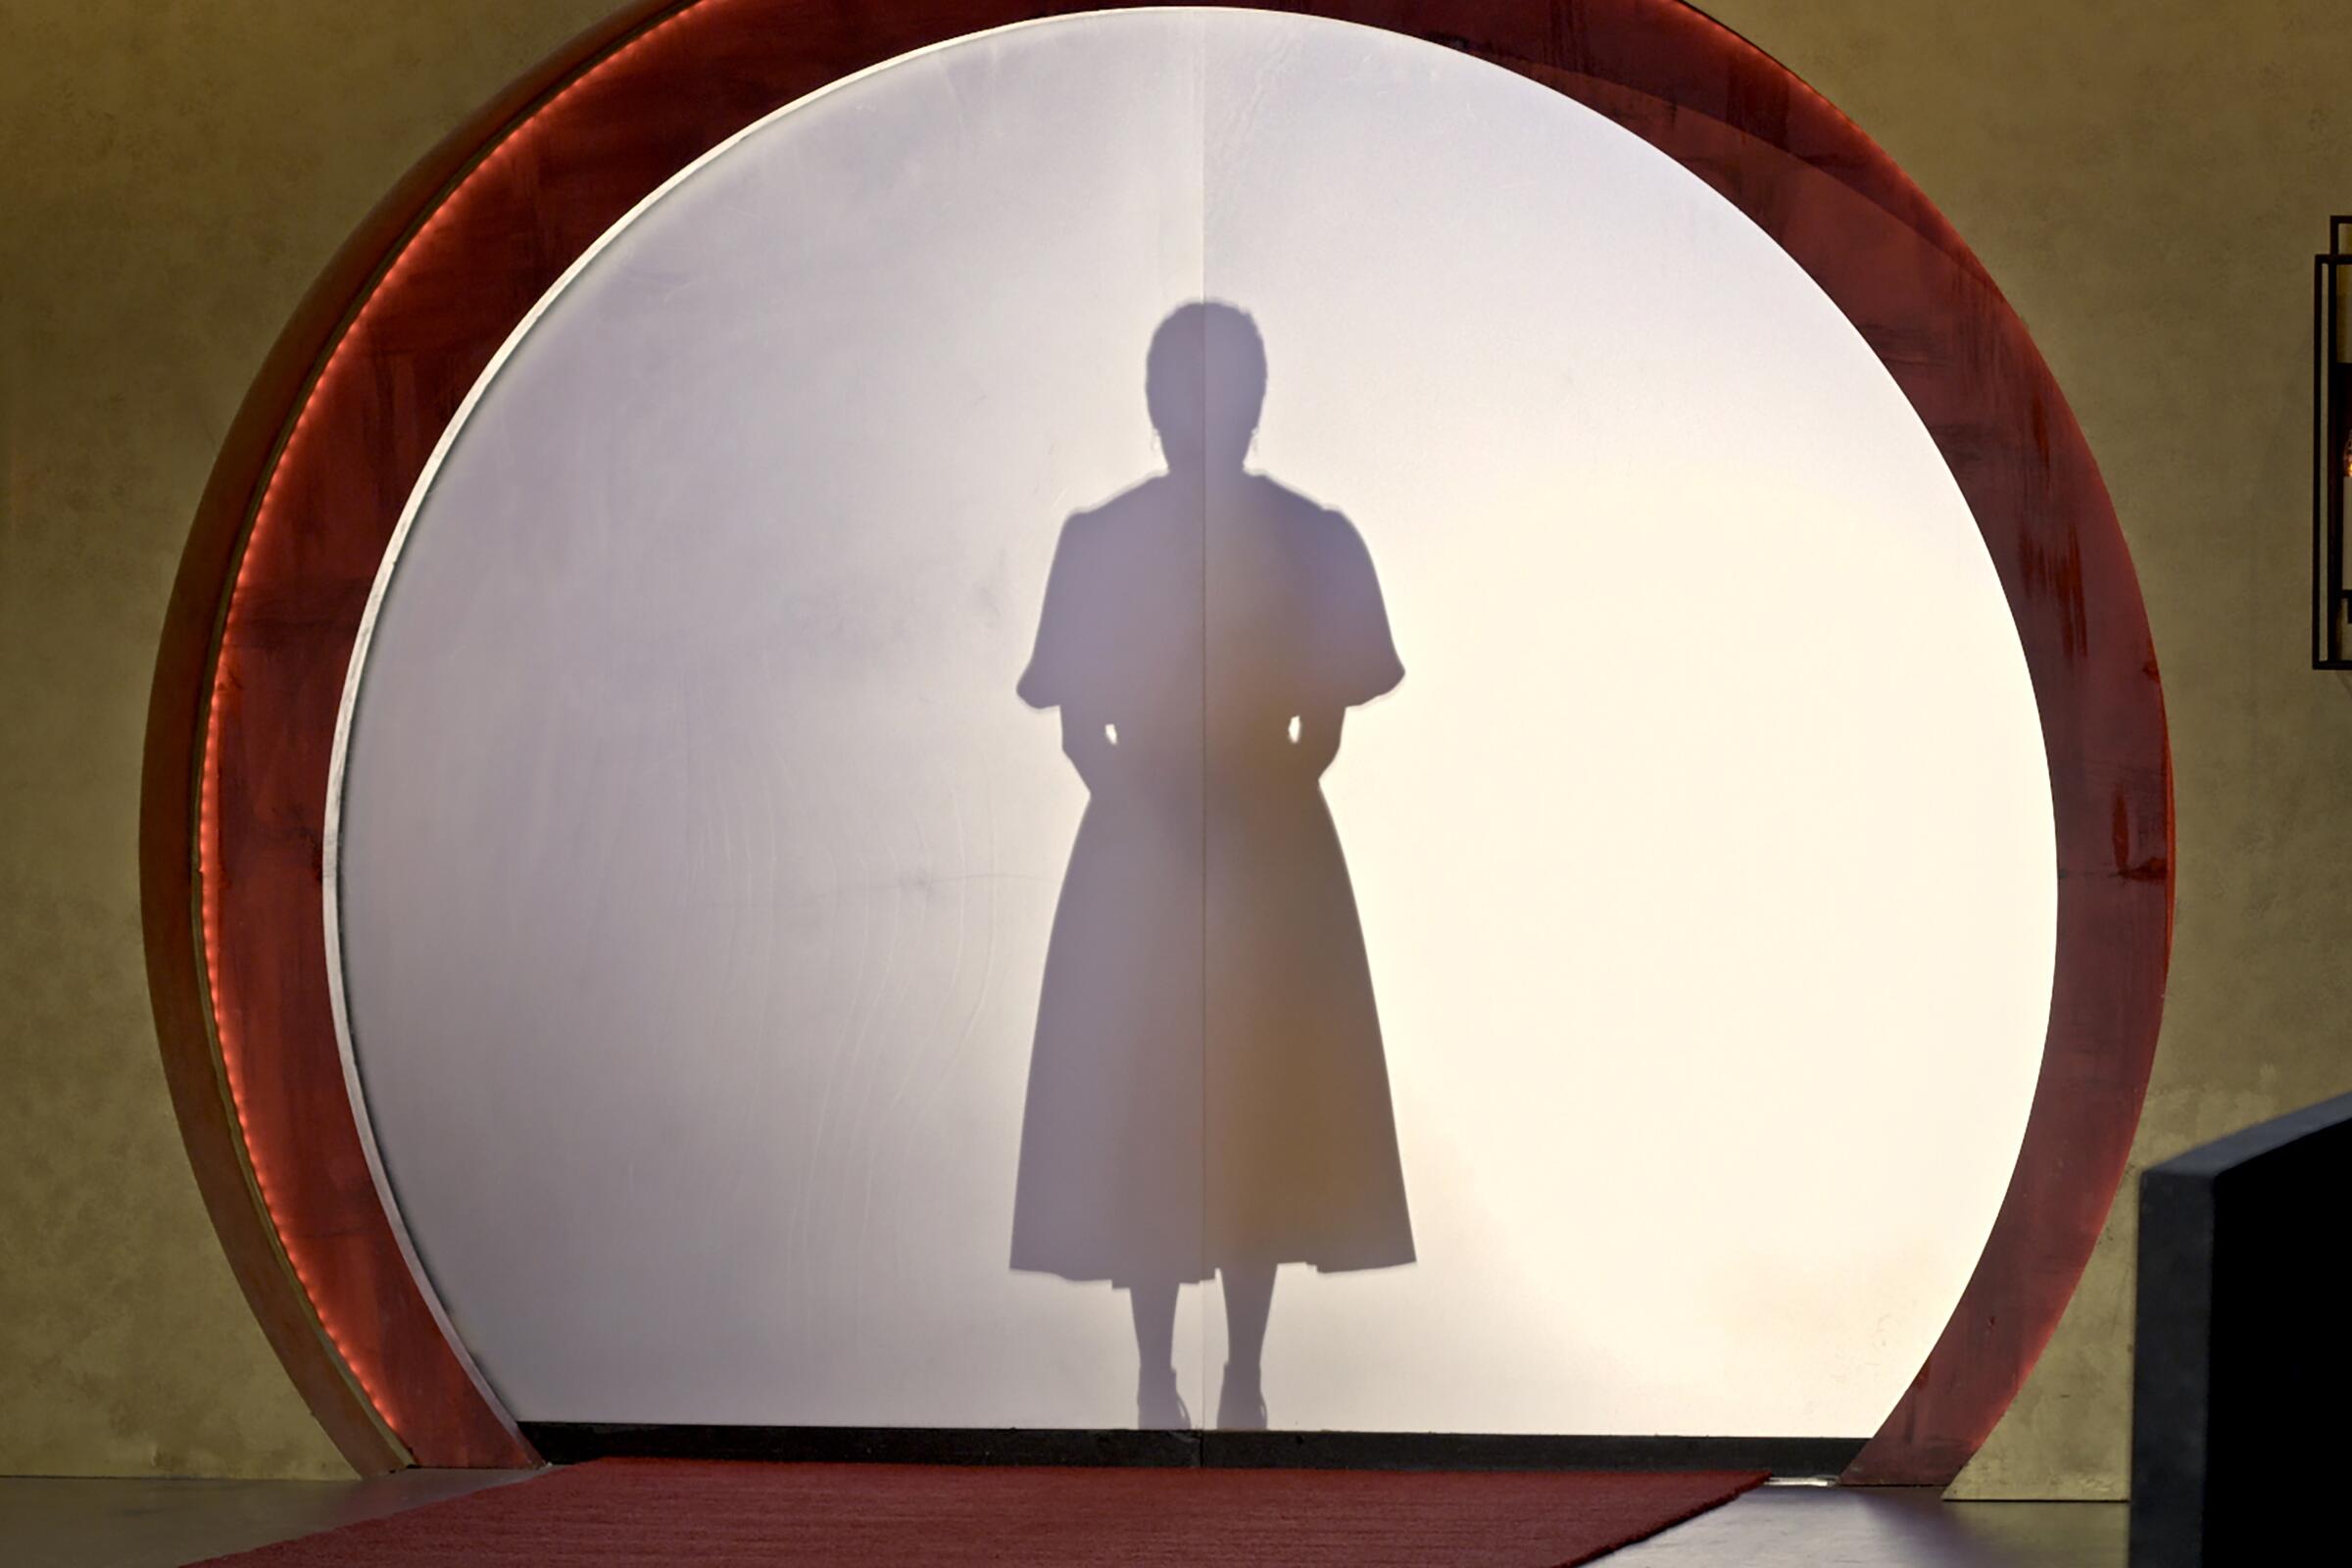 A silhouette of a person in a dress behind glass.